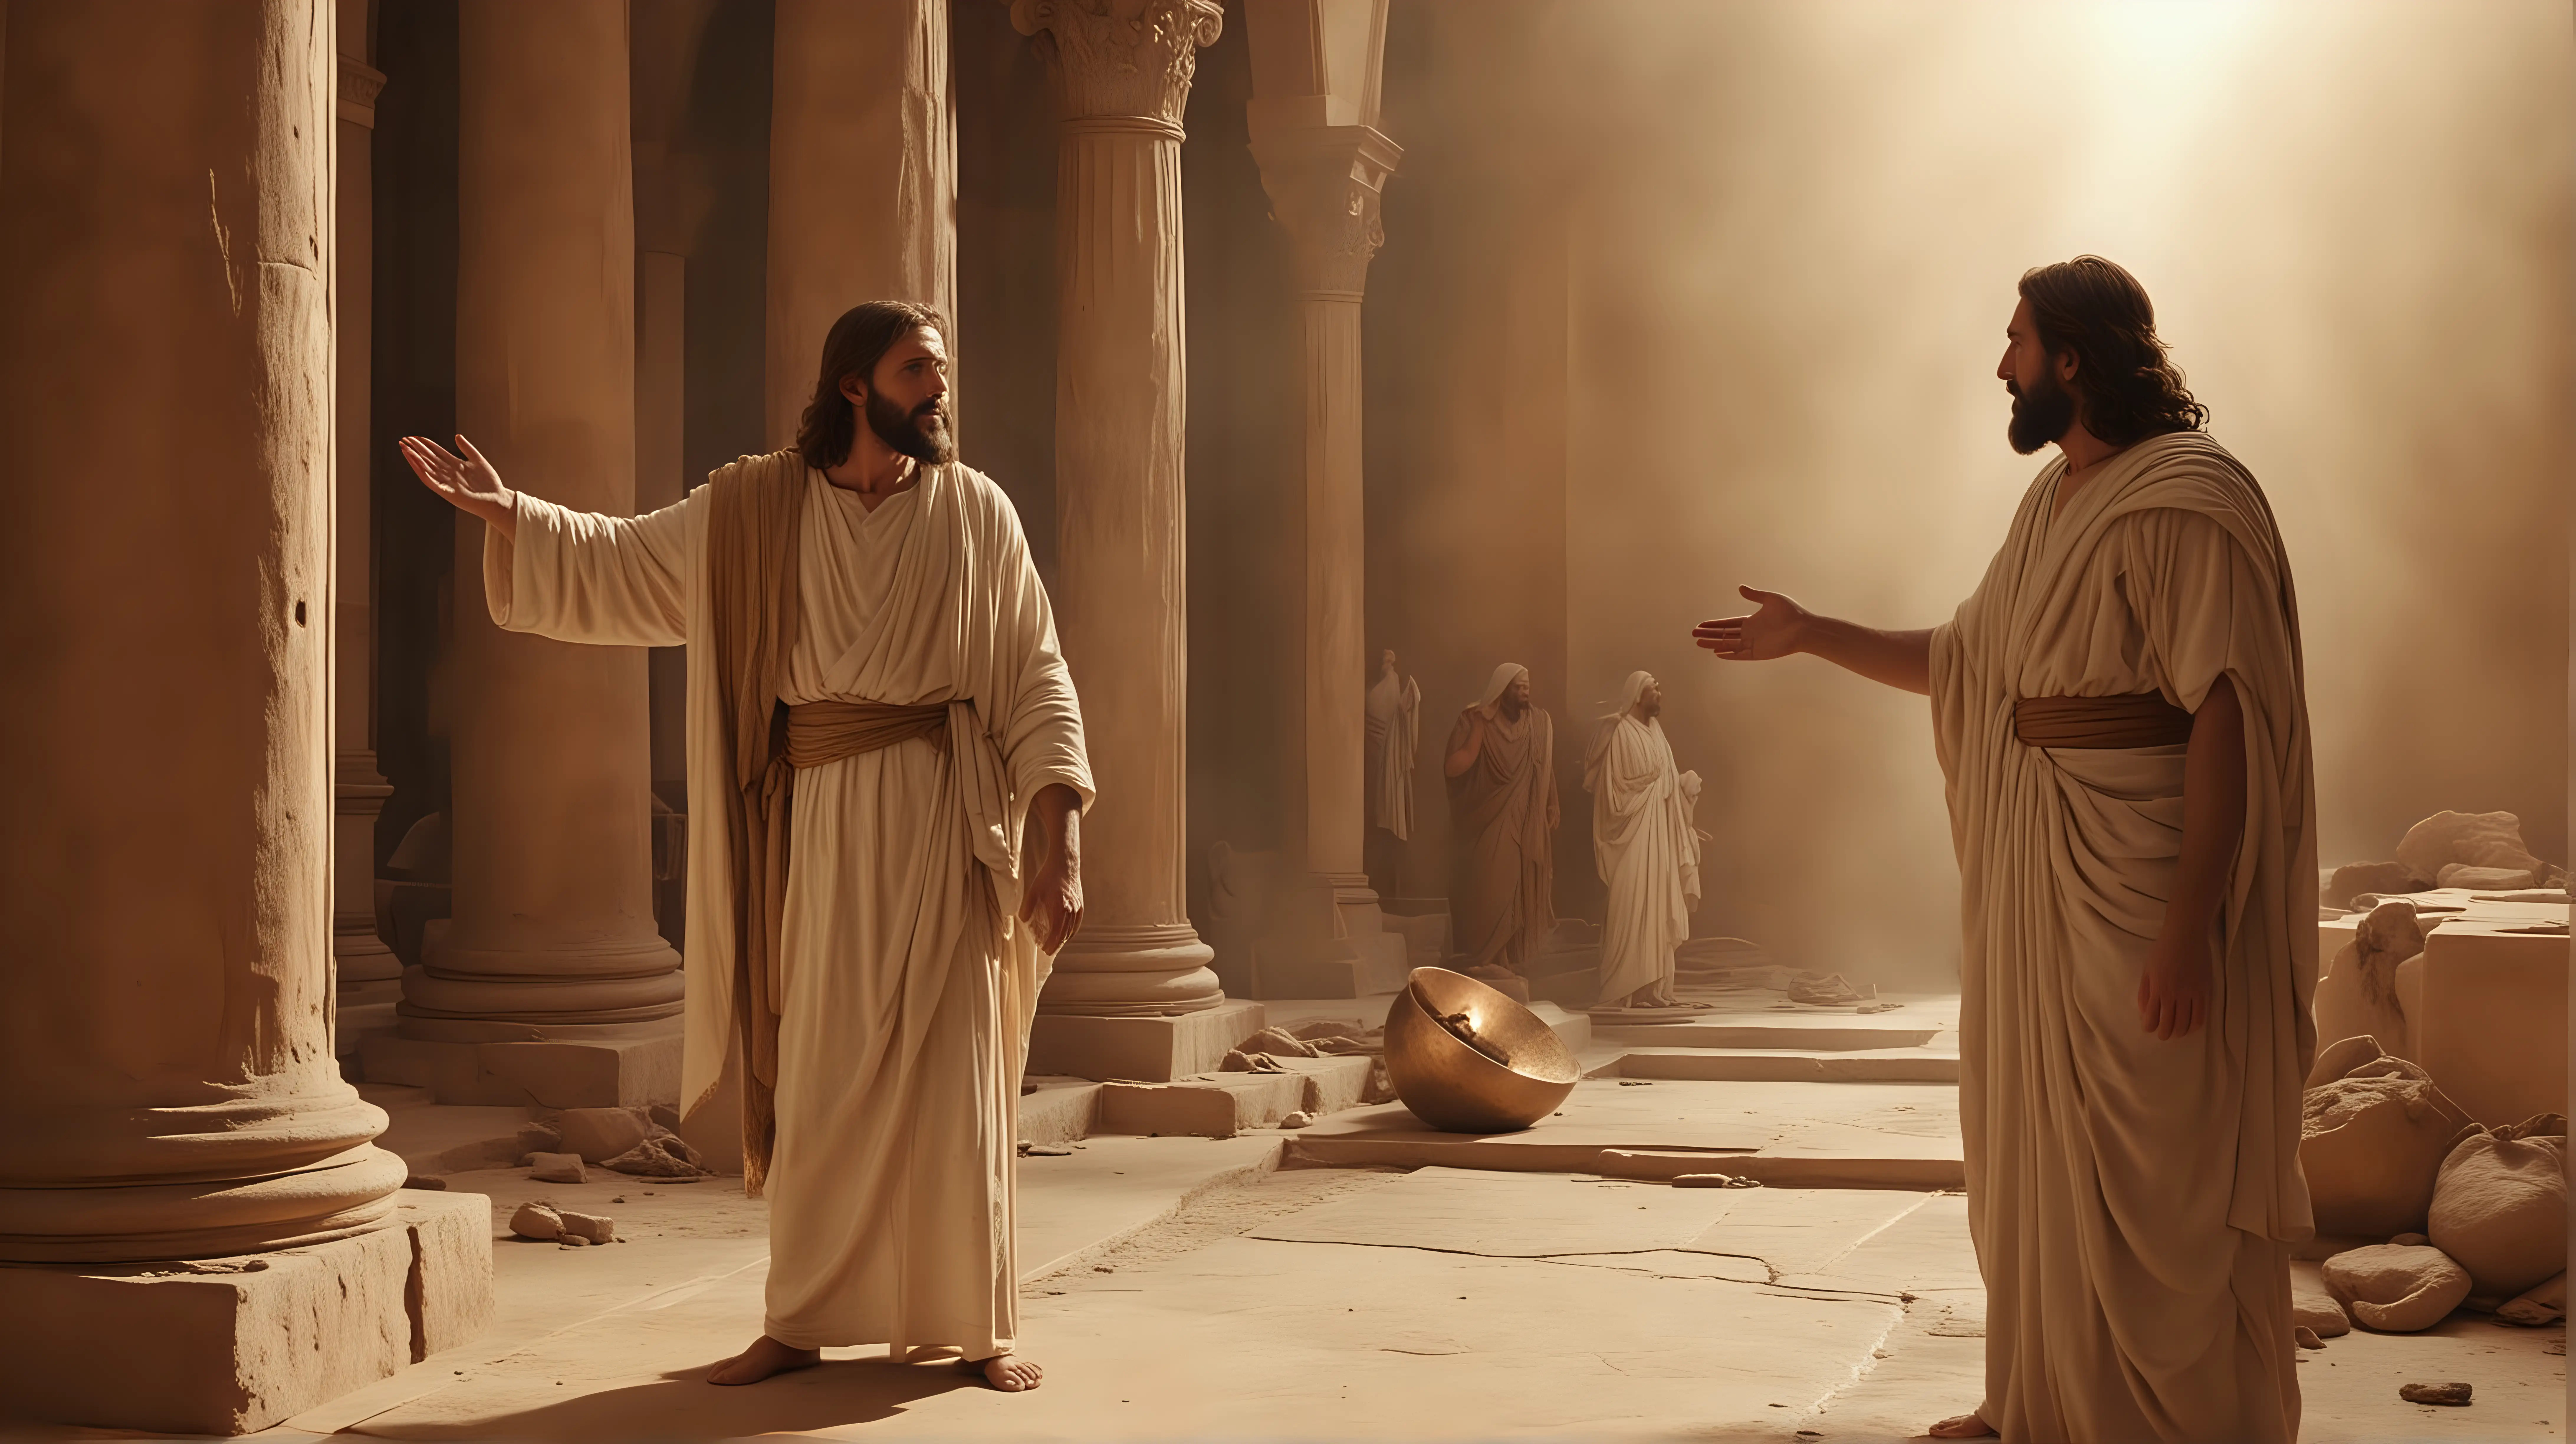 ancient Jesus meeting Sisyphos and giving him a preach, very lucid scene, empowering, superrealistic, optimistic enlightement, warm UHD 8k, sepia ancient colors 